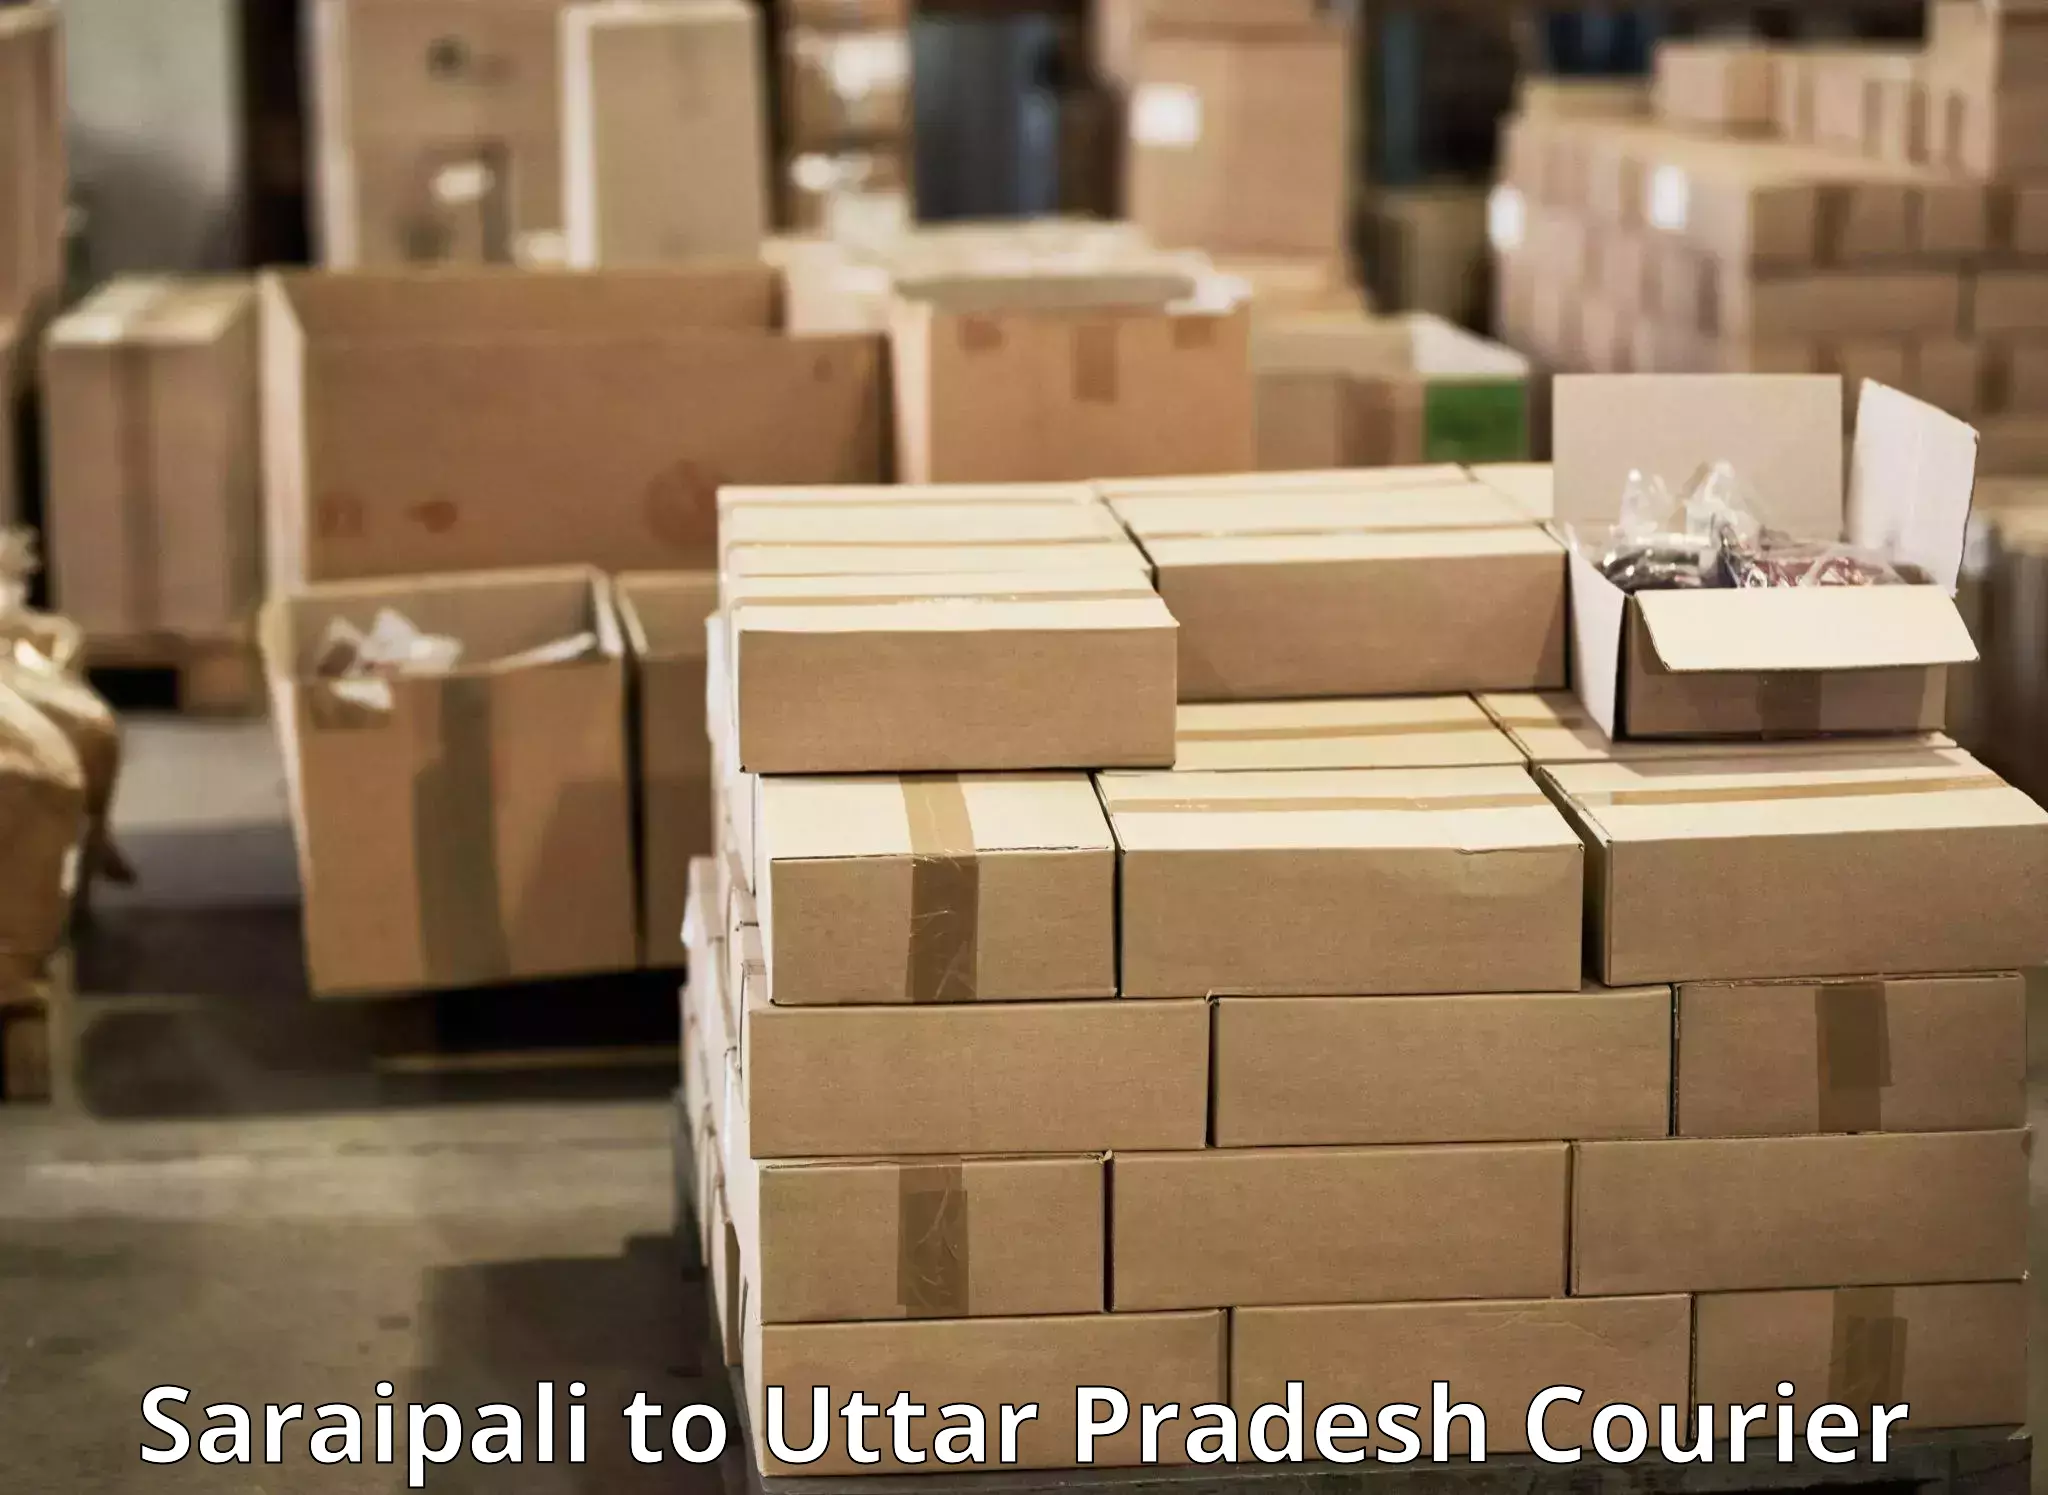 Reliable delivery network Saraipali to Dadri